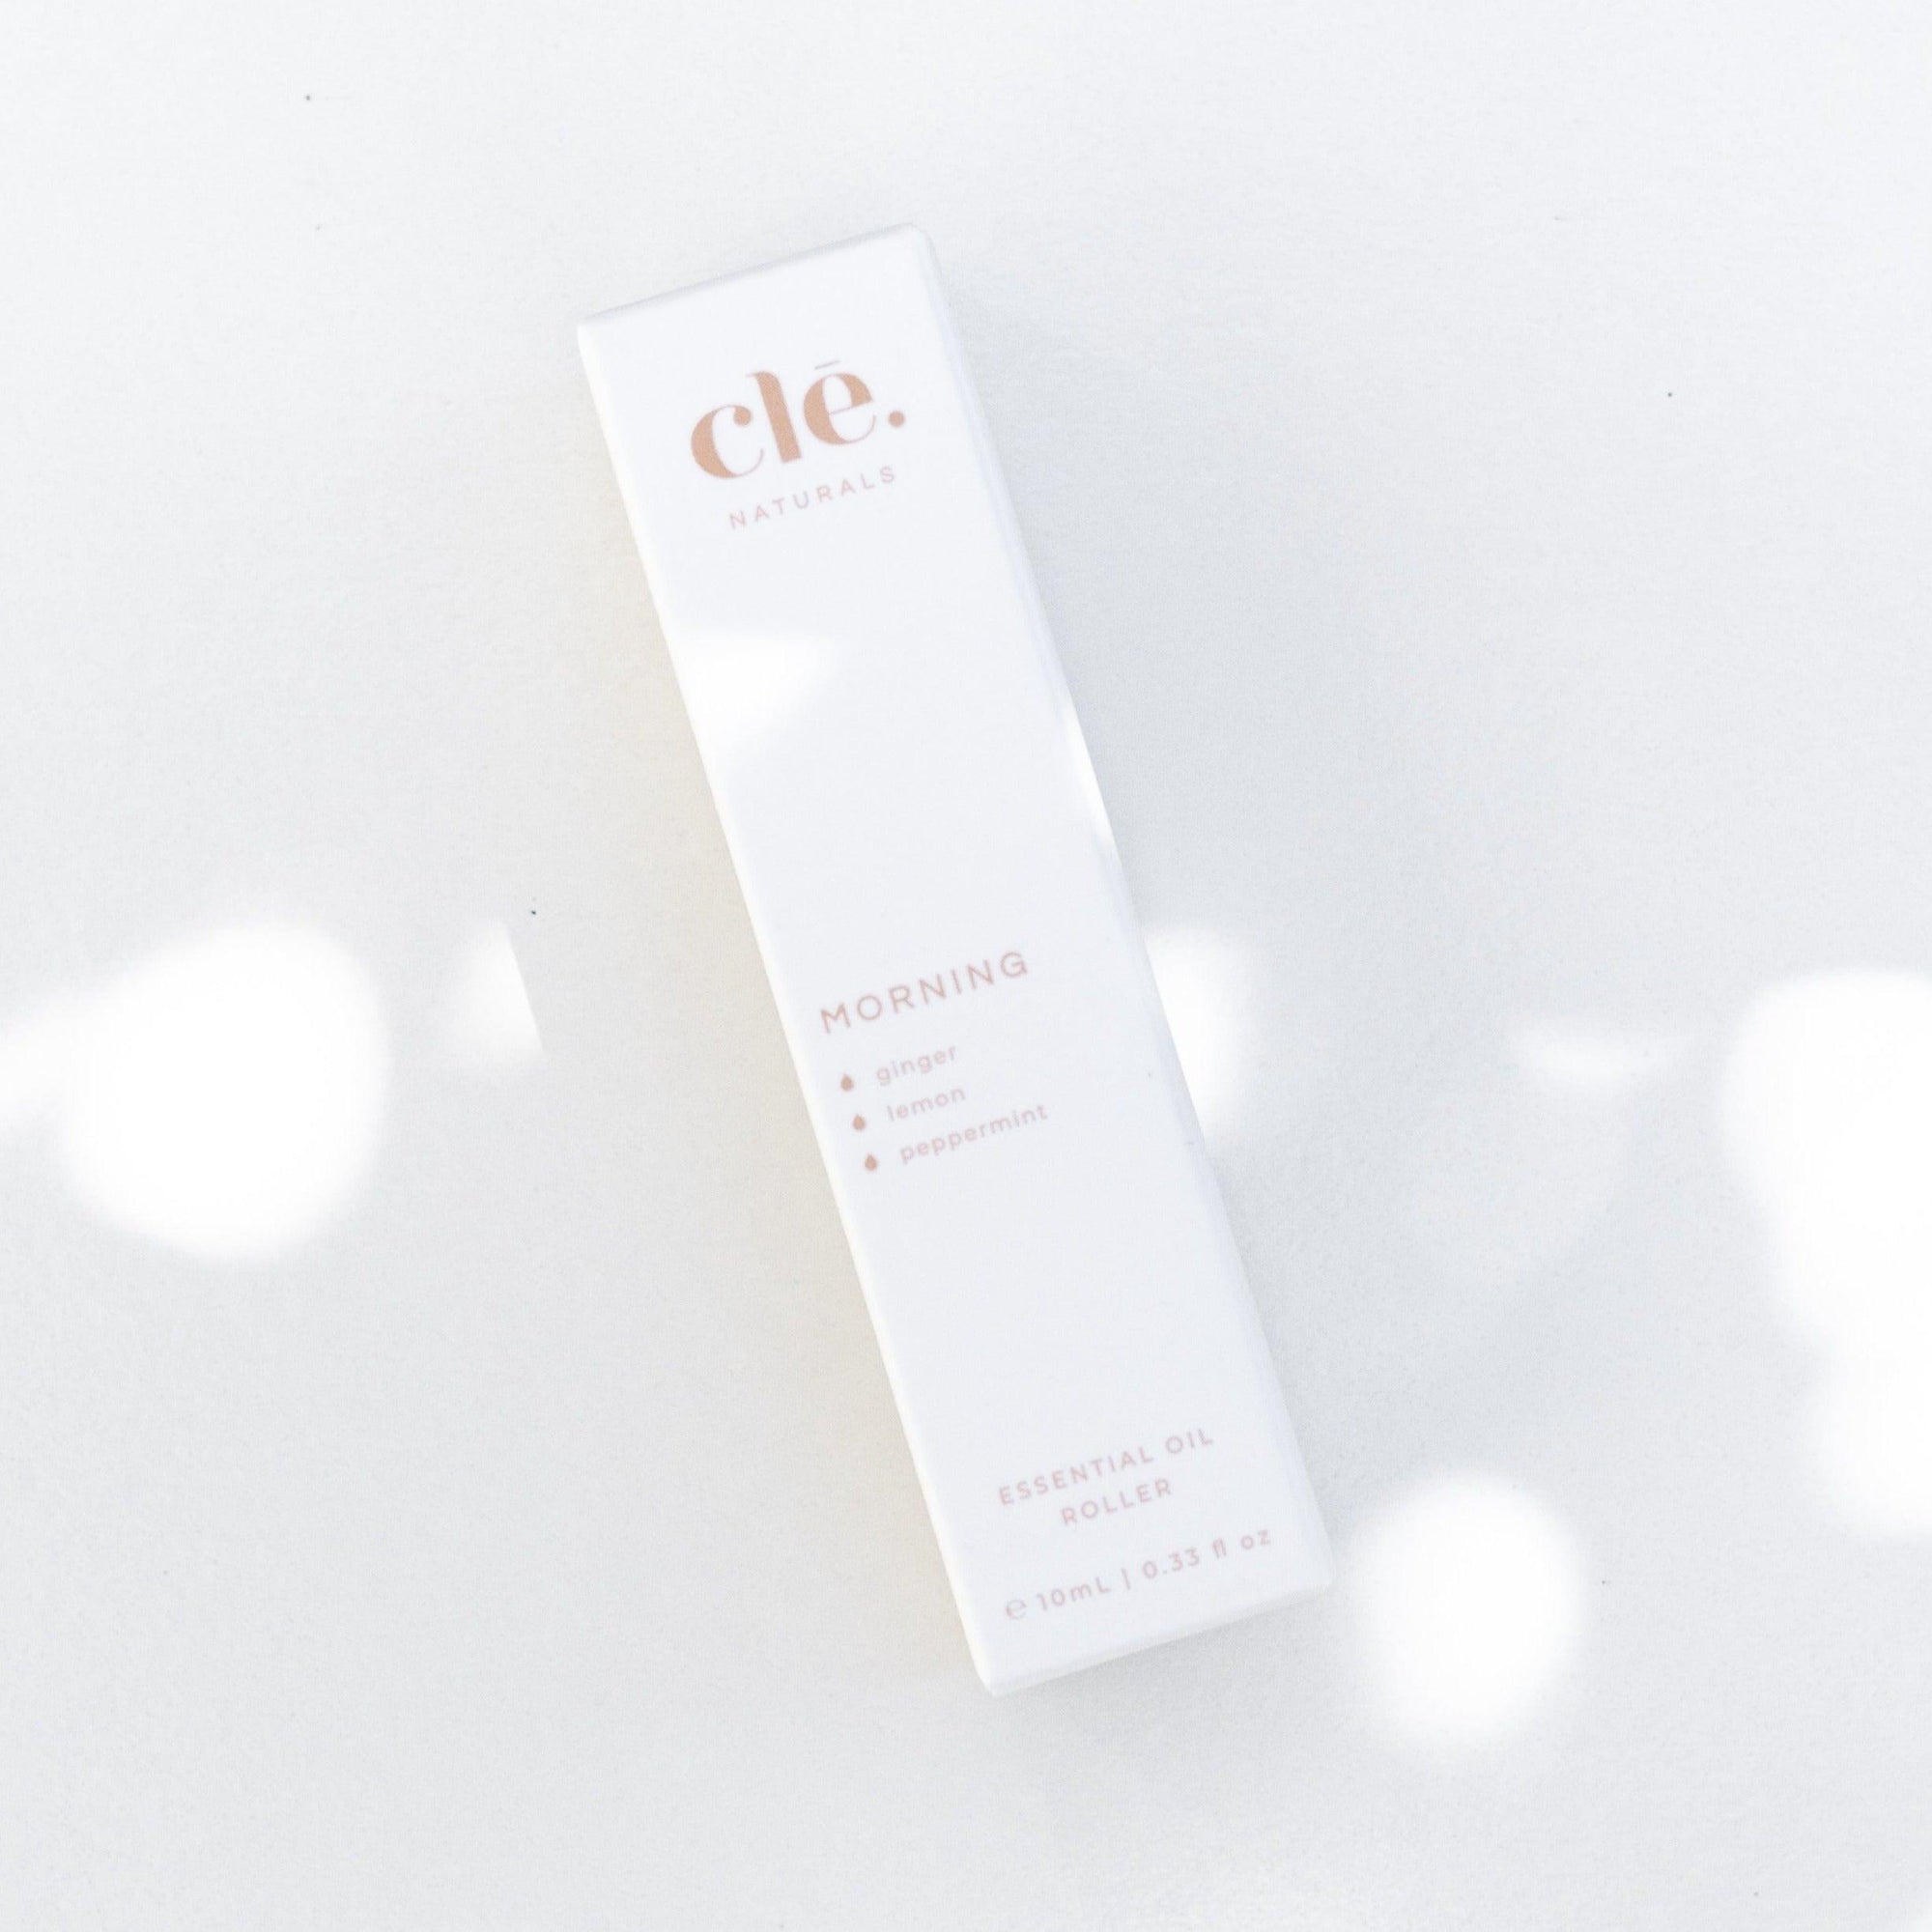 A box of of Clē Naturals morning essential oil on a white surface.